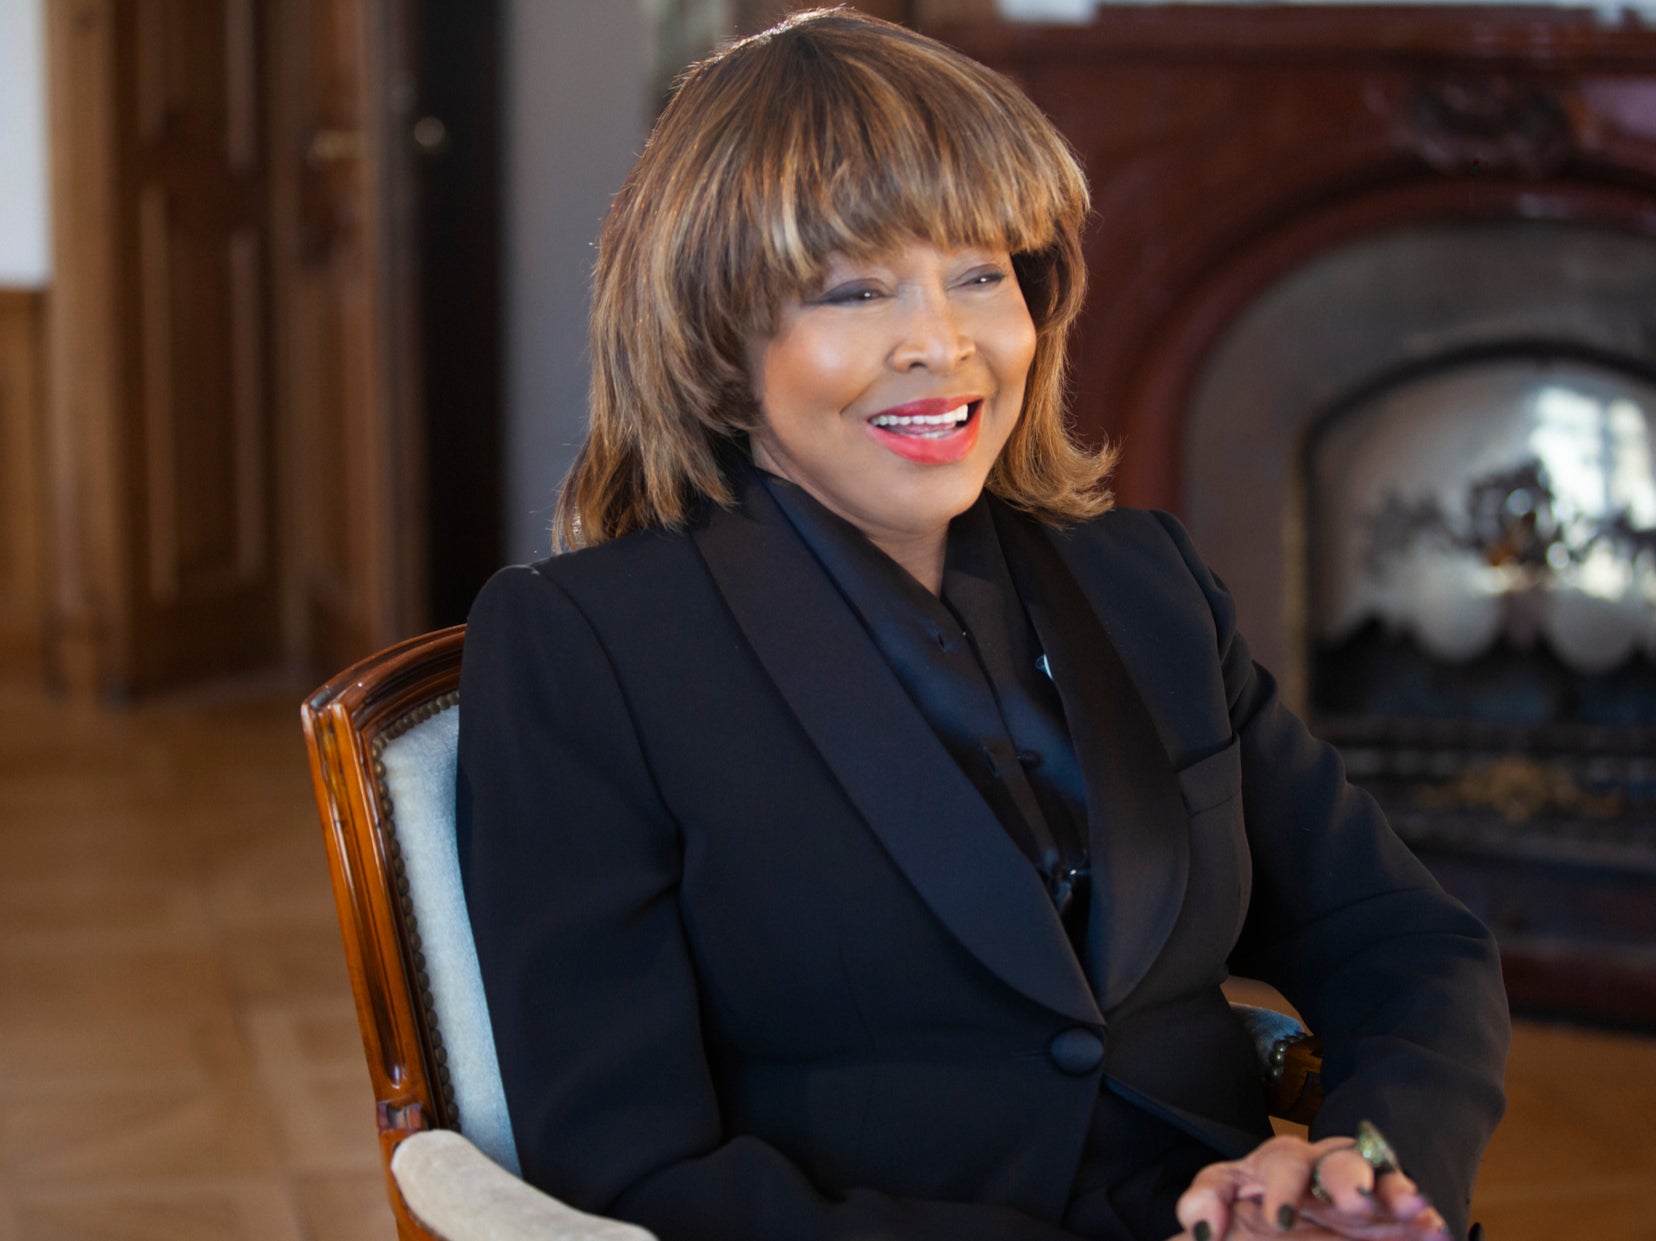 Tina Turner is interviewed for the ‘TINA’ documentary at her home in Zurich